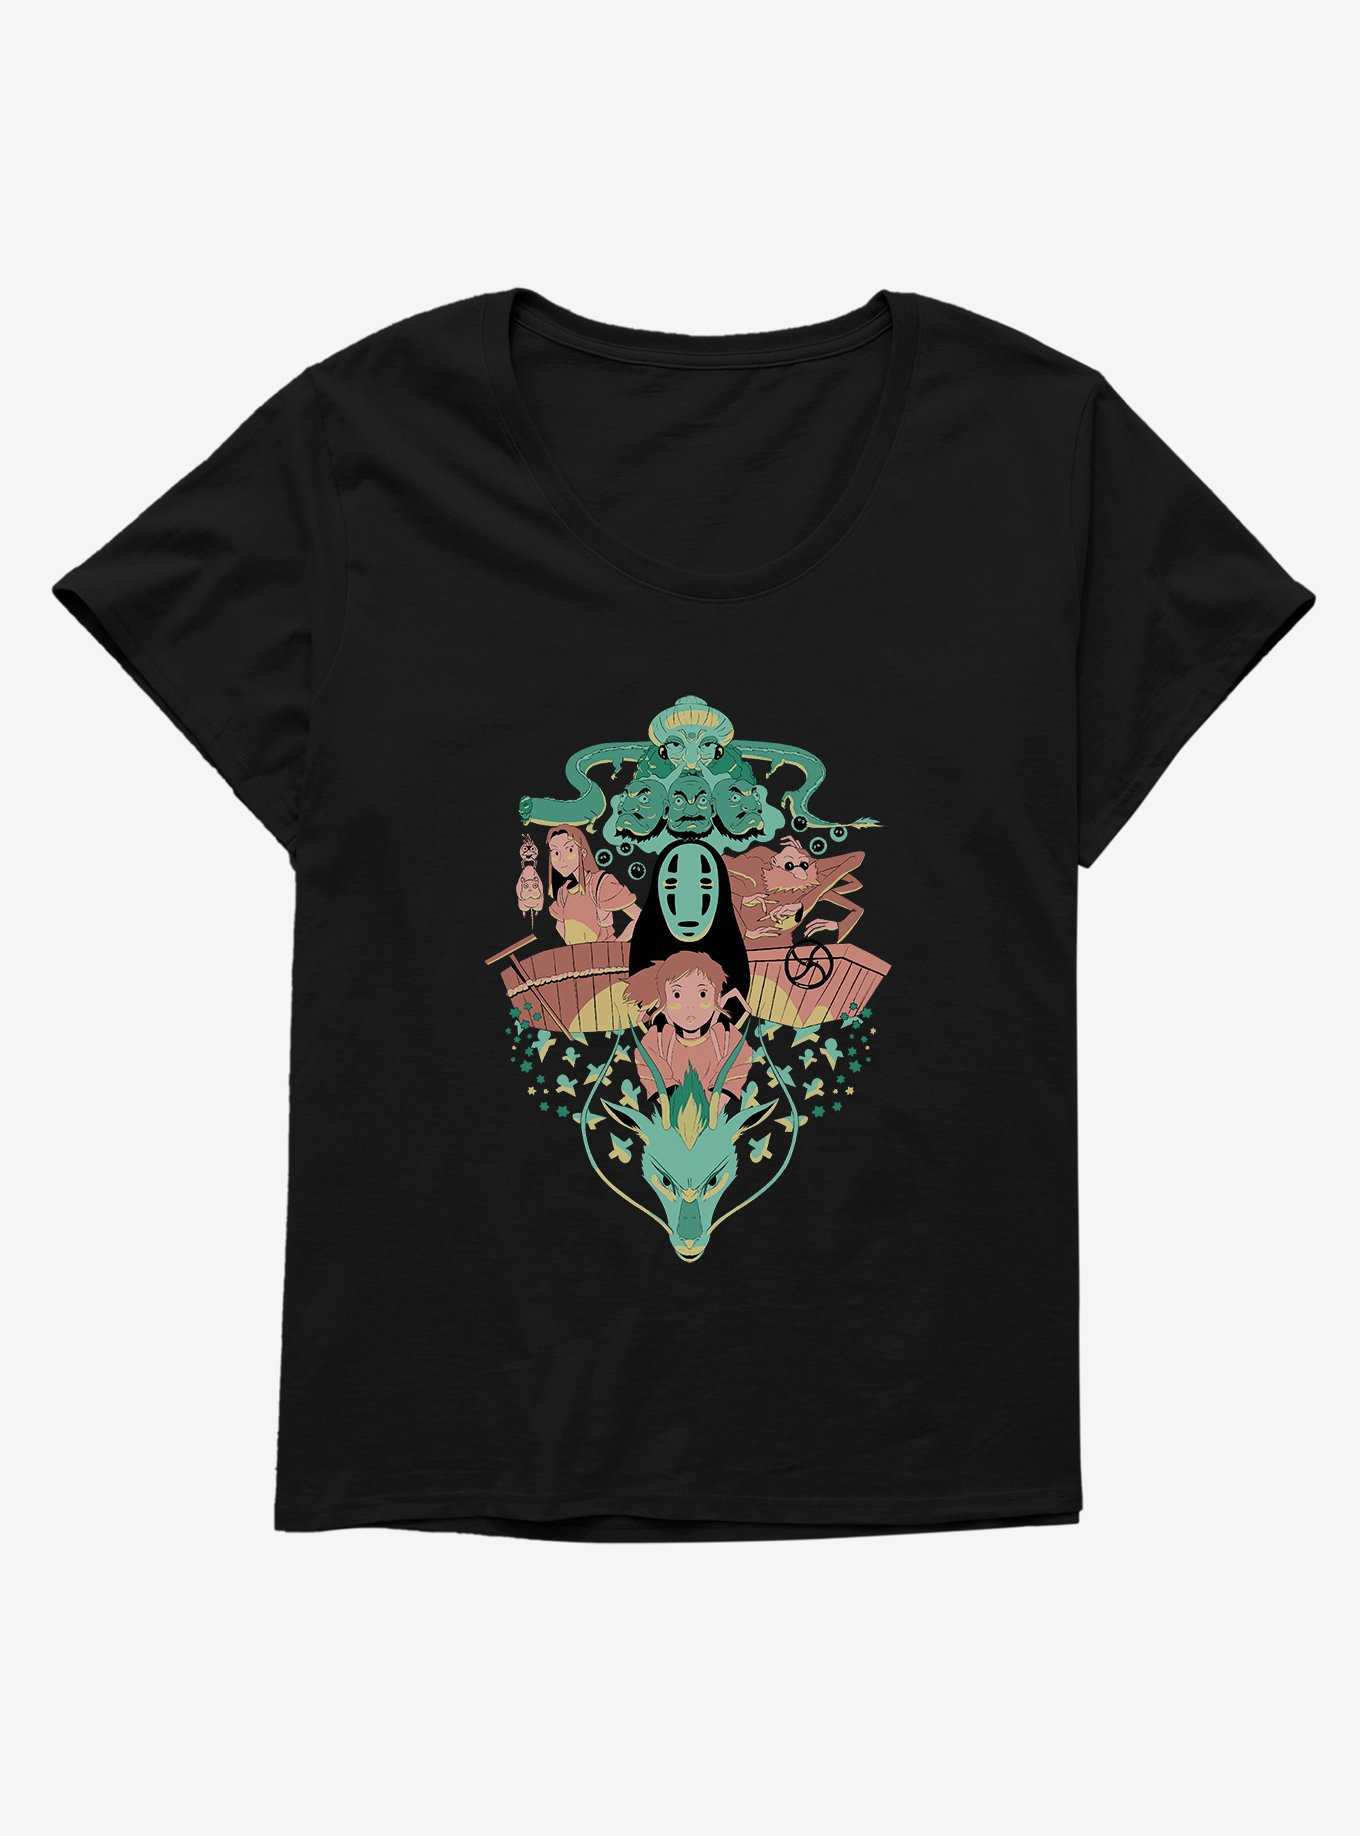 Studio Ghibli Spirited Away Chihiro And No Face Group Crest Womens T-Shirt Plus Size, , hi-res